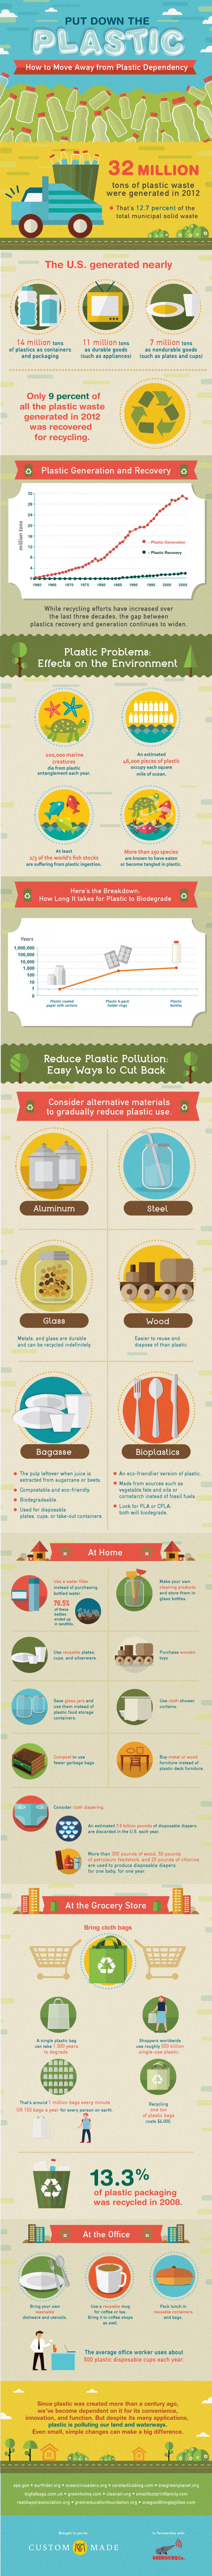 How to Move Away from Plastic Dependency Infographic